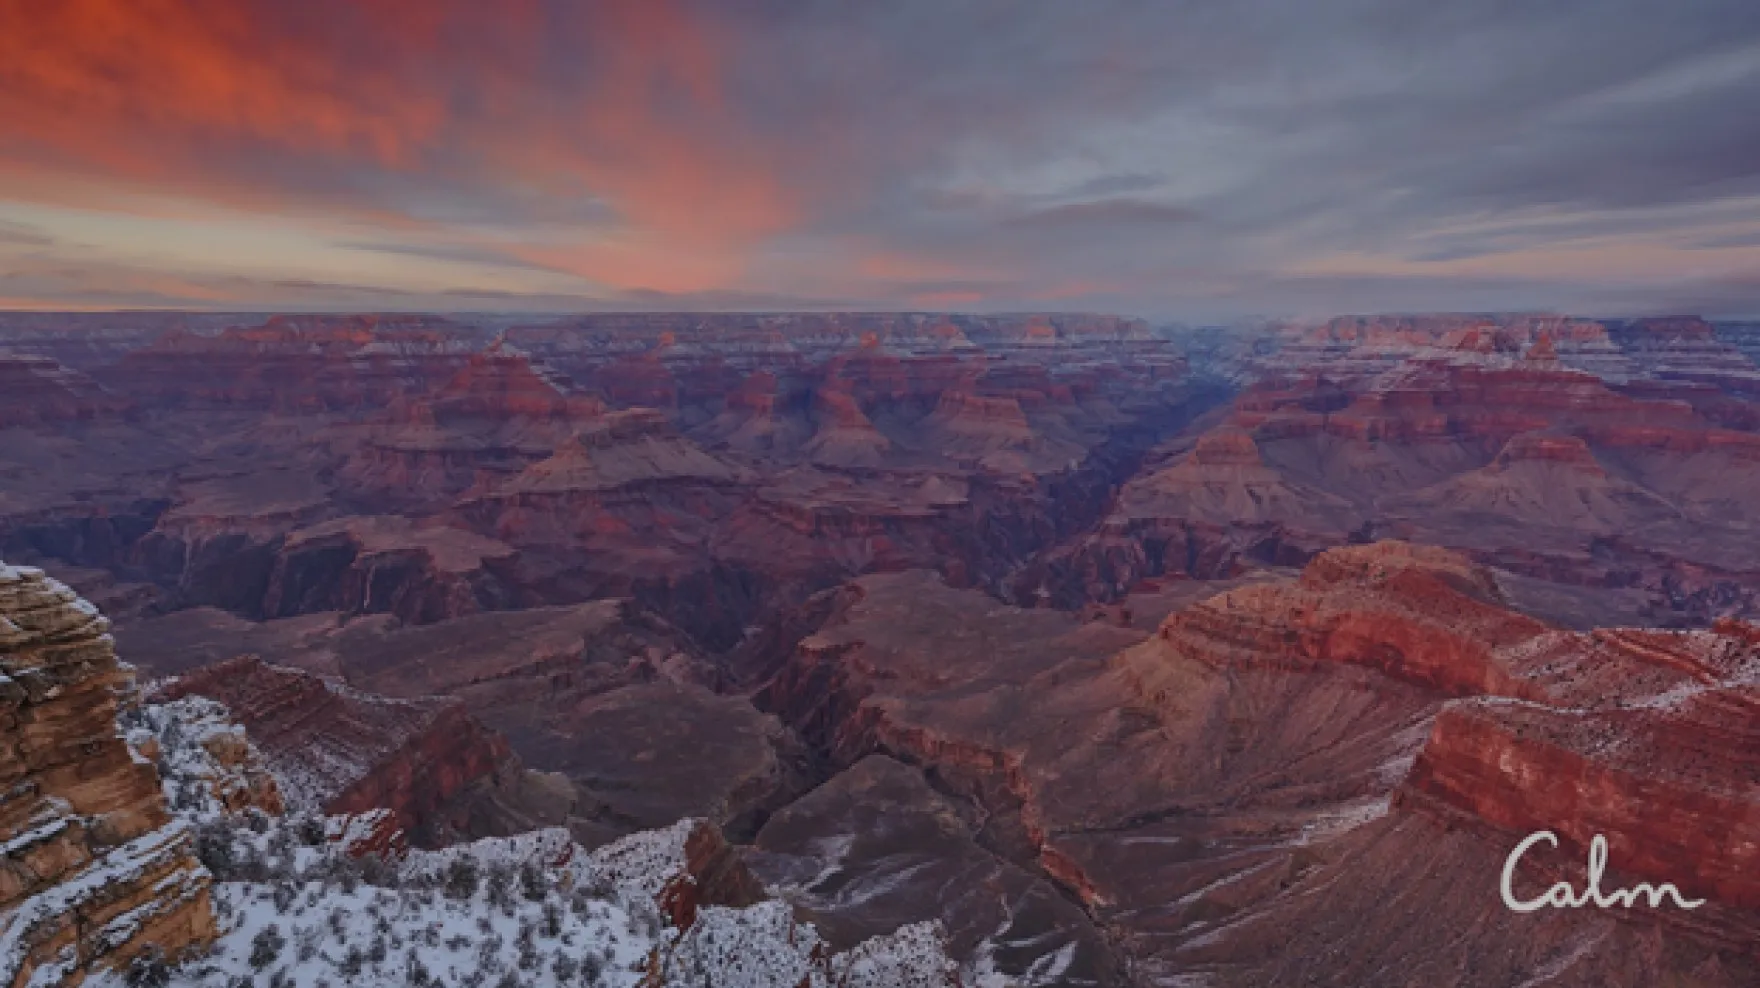 The Grand Canyon at sunset, with a light dusting of snow on the ground. The Calm logo is in the lower right corner.